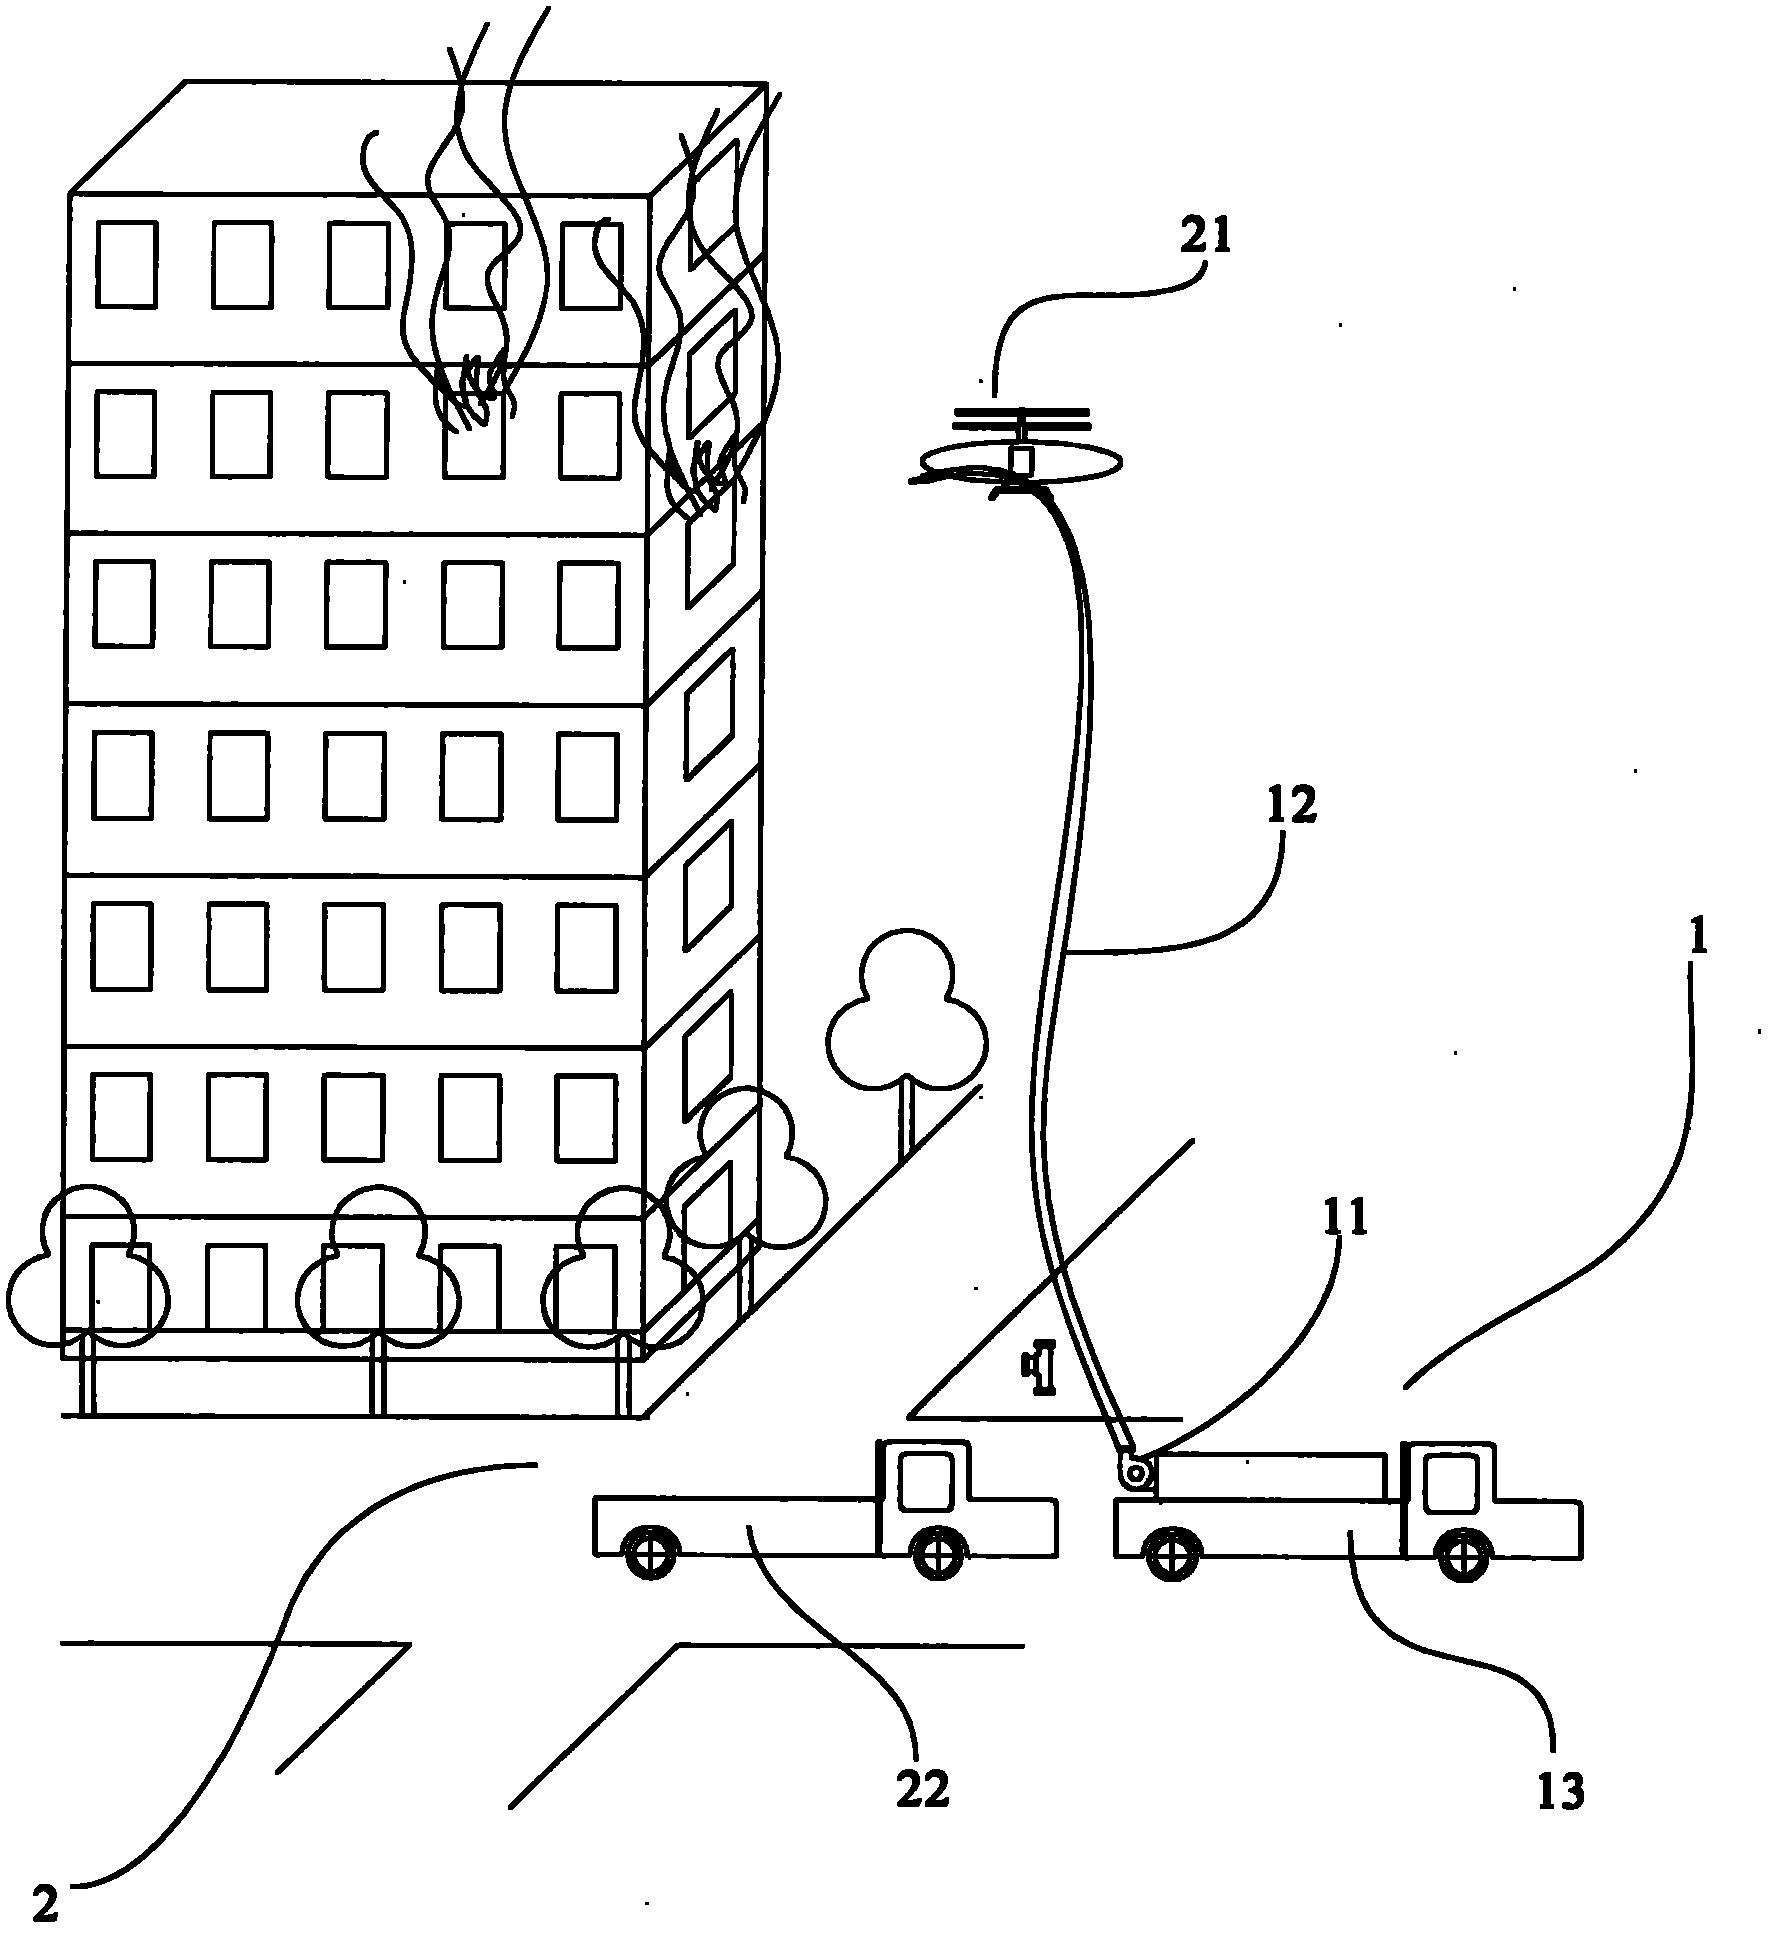 Air extinguishment robot system for high-rise building and steep hill forest